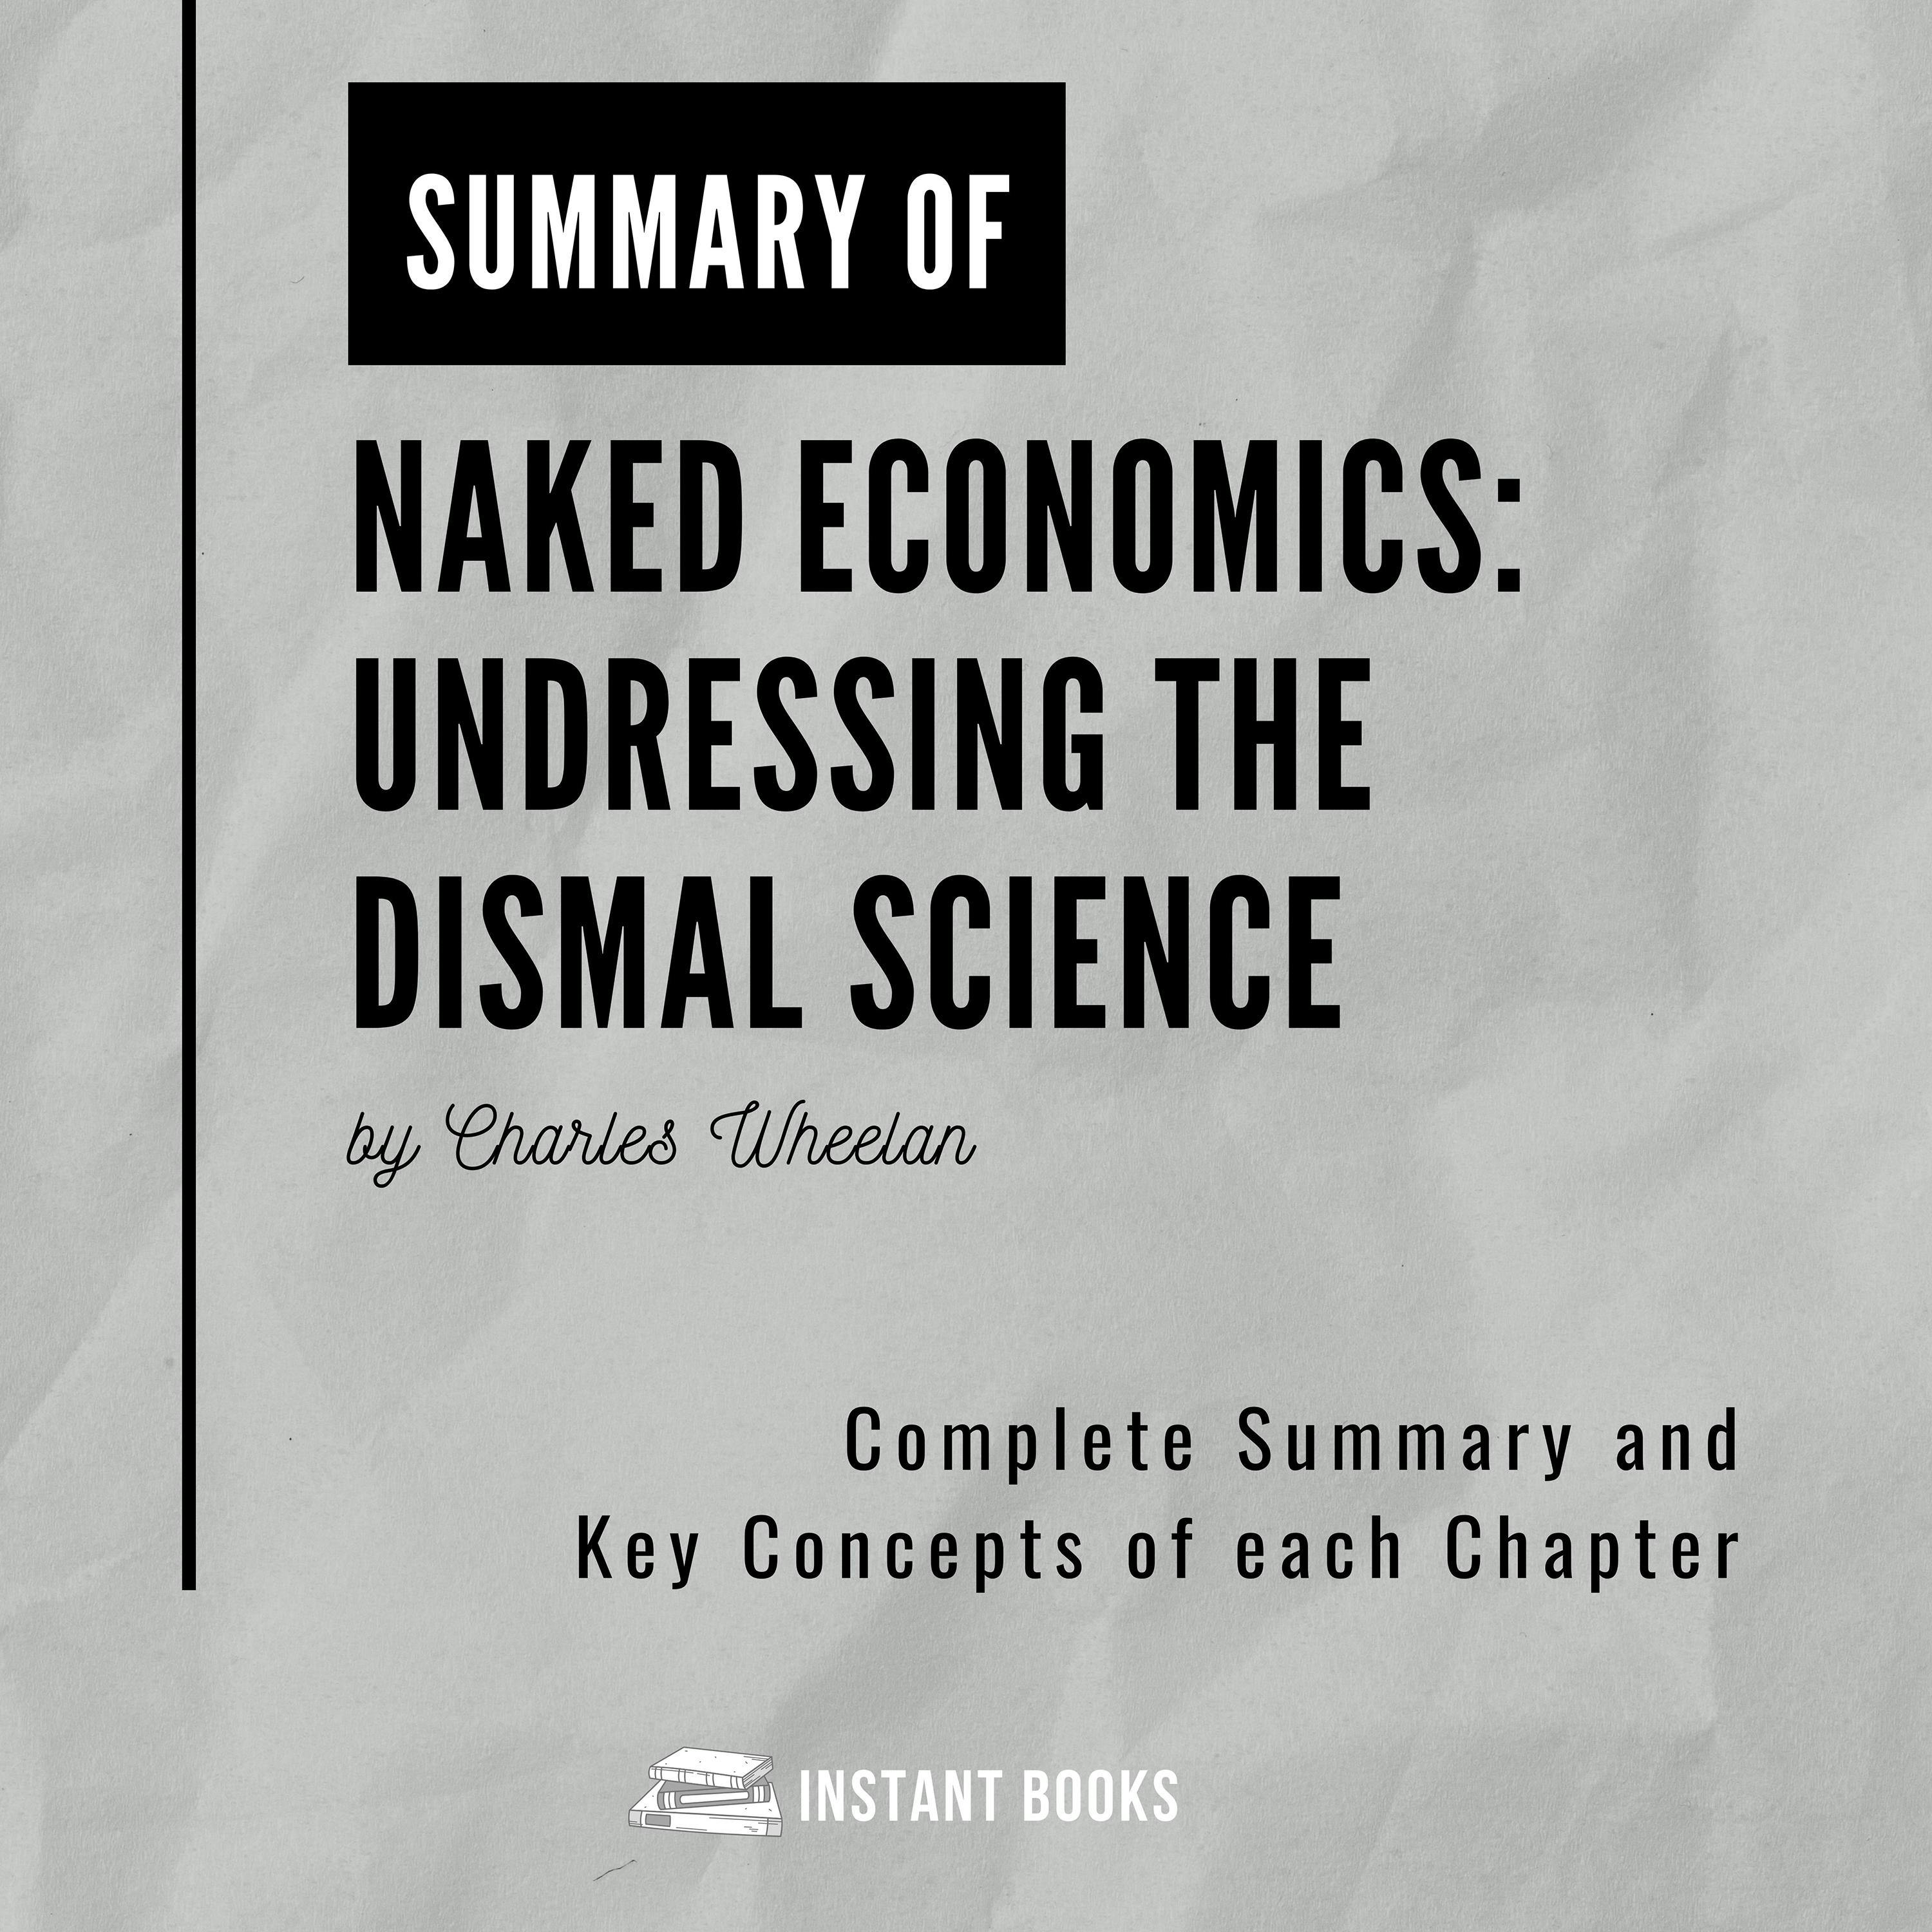 Summary of Naked Economics: Undressing the Dismal Science by Charlees Wheelan: Complete Summary and Key Concepts of each Chapter - undefined